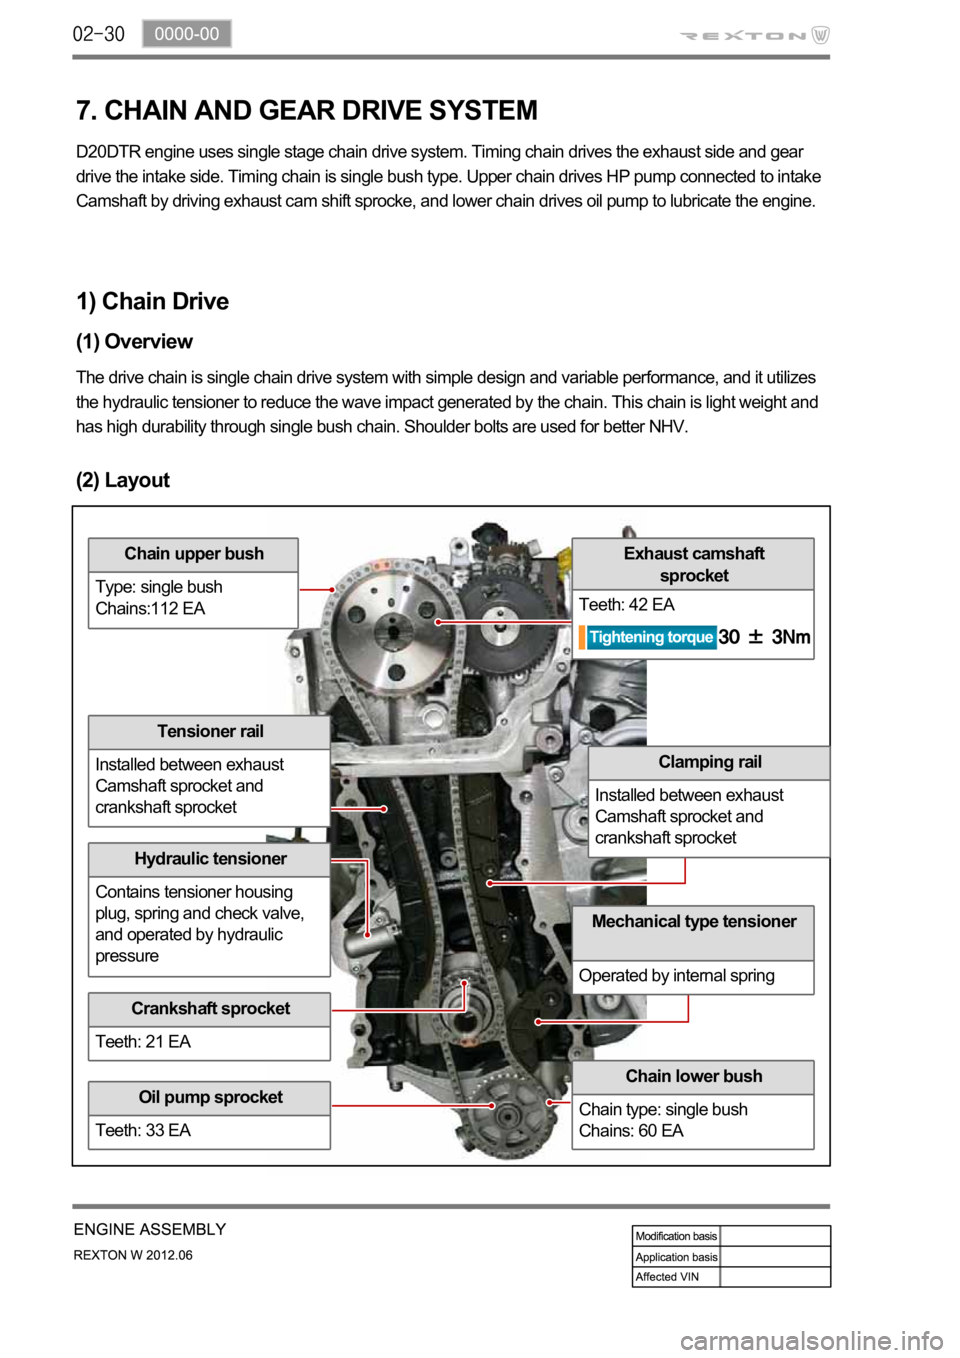 SSANGYONG NEW REXTON 2012  Service Manual (2) Layout
Chain upper bush
Type: single bush
Chains:112 EA
Tensioner rail
Installed between exhaust 
Camshaft sprocket and 
crankshaft sprocket
Hydraulic tensioner
Contains tensioner housing 
plug, s